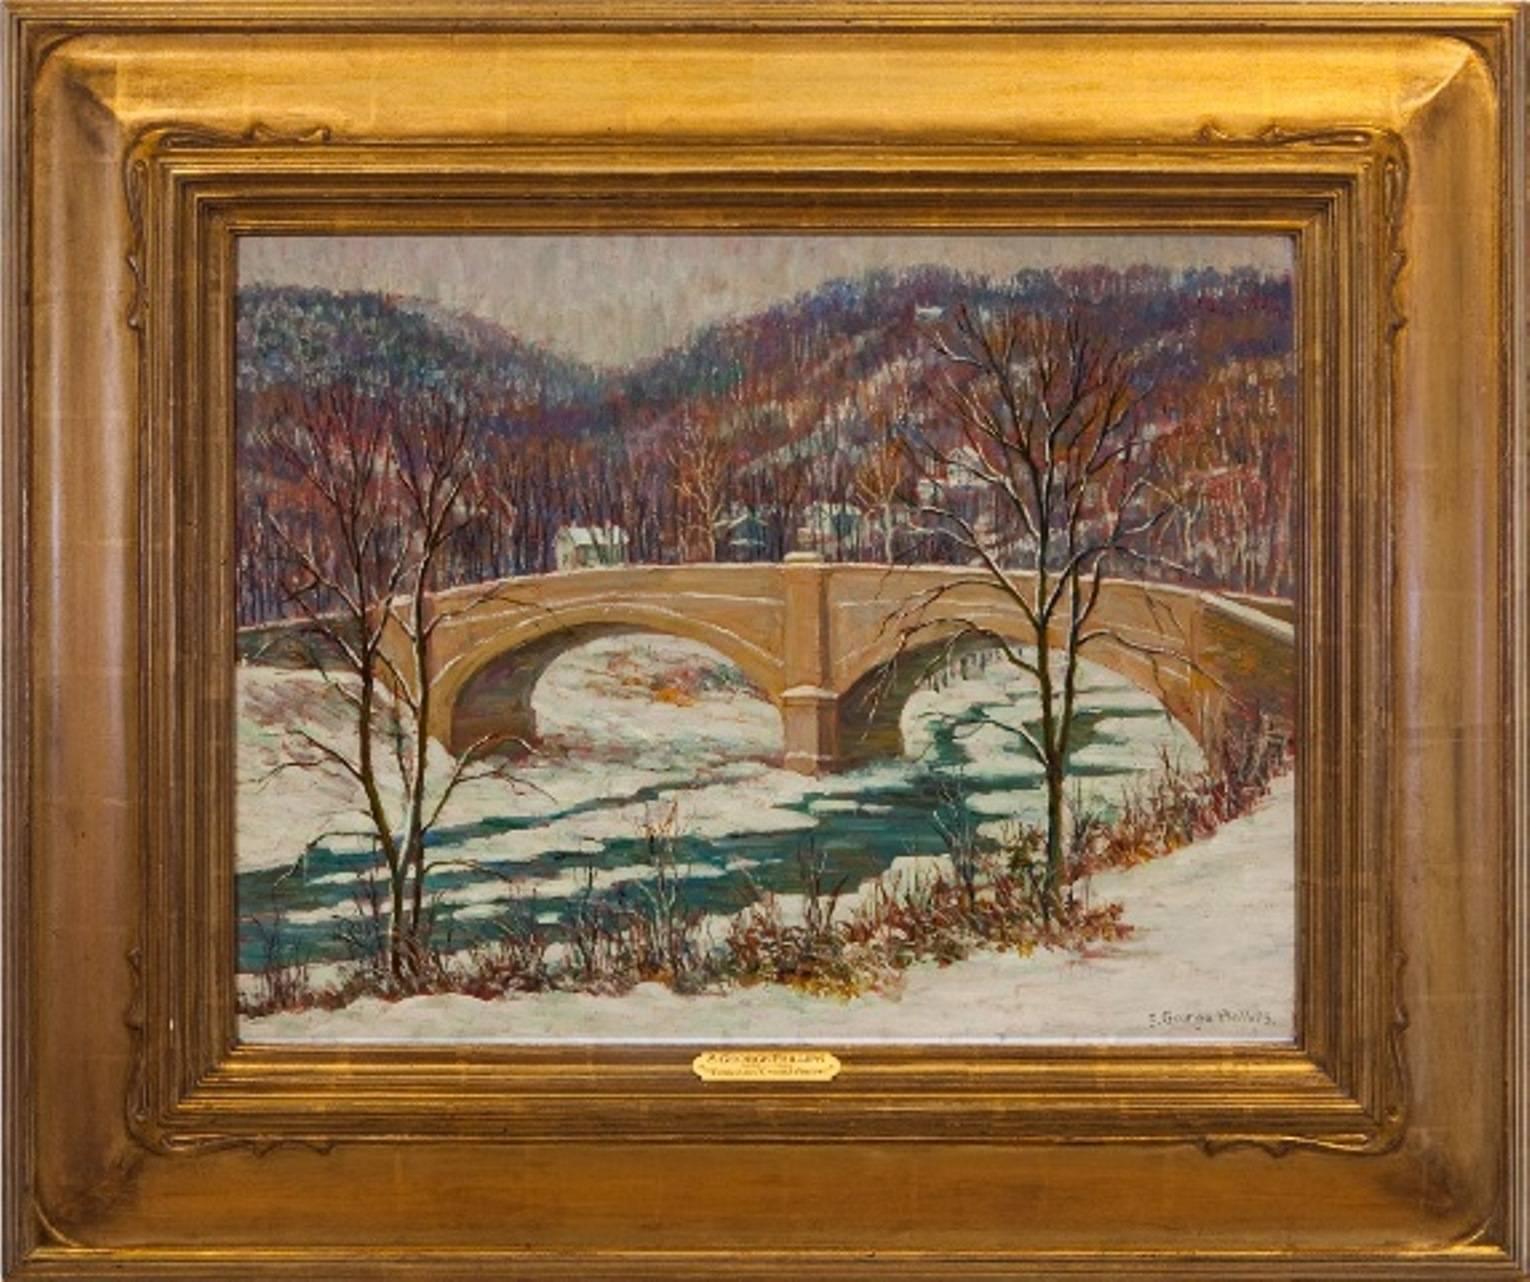 S. George Phillips Landscape Painting - "Tohickon Creek, Winter"